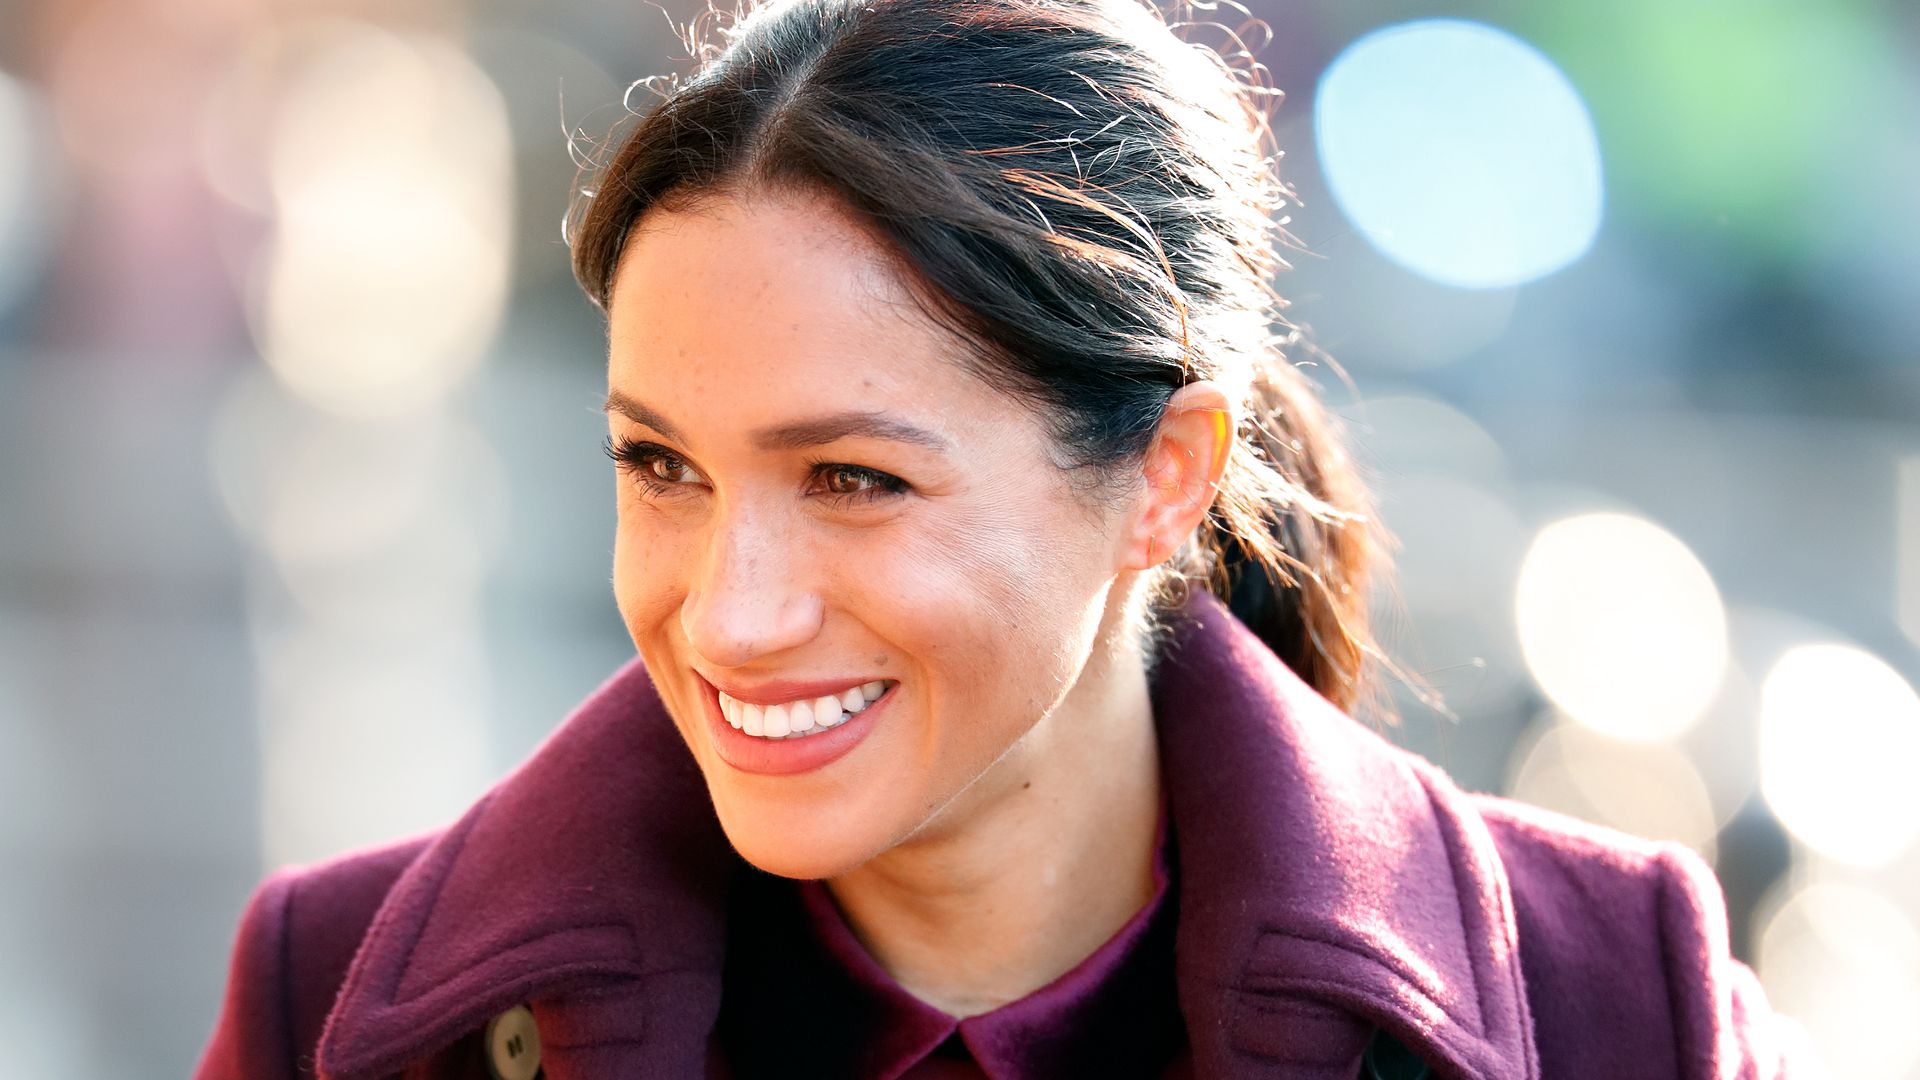 Meghan, Duchess of Sussex visits the Hubb Community Kitchen to see how funds raised by the 'Together: Our Community Cookbook' are making a difference at Al Manaar, North Kensington on November 21, 2018 in London, England. Together: Our Community Cookbook features over 50 recipes from w